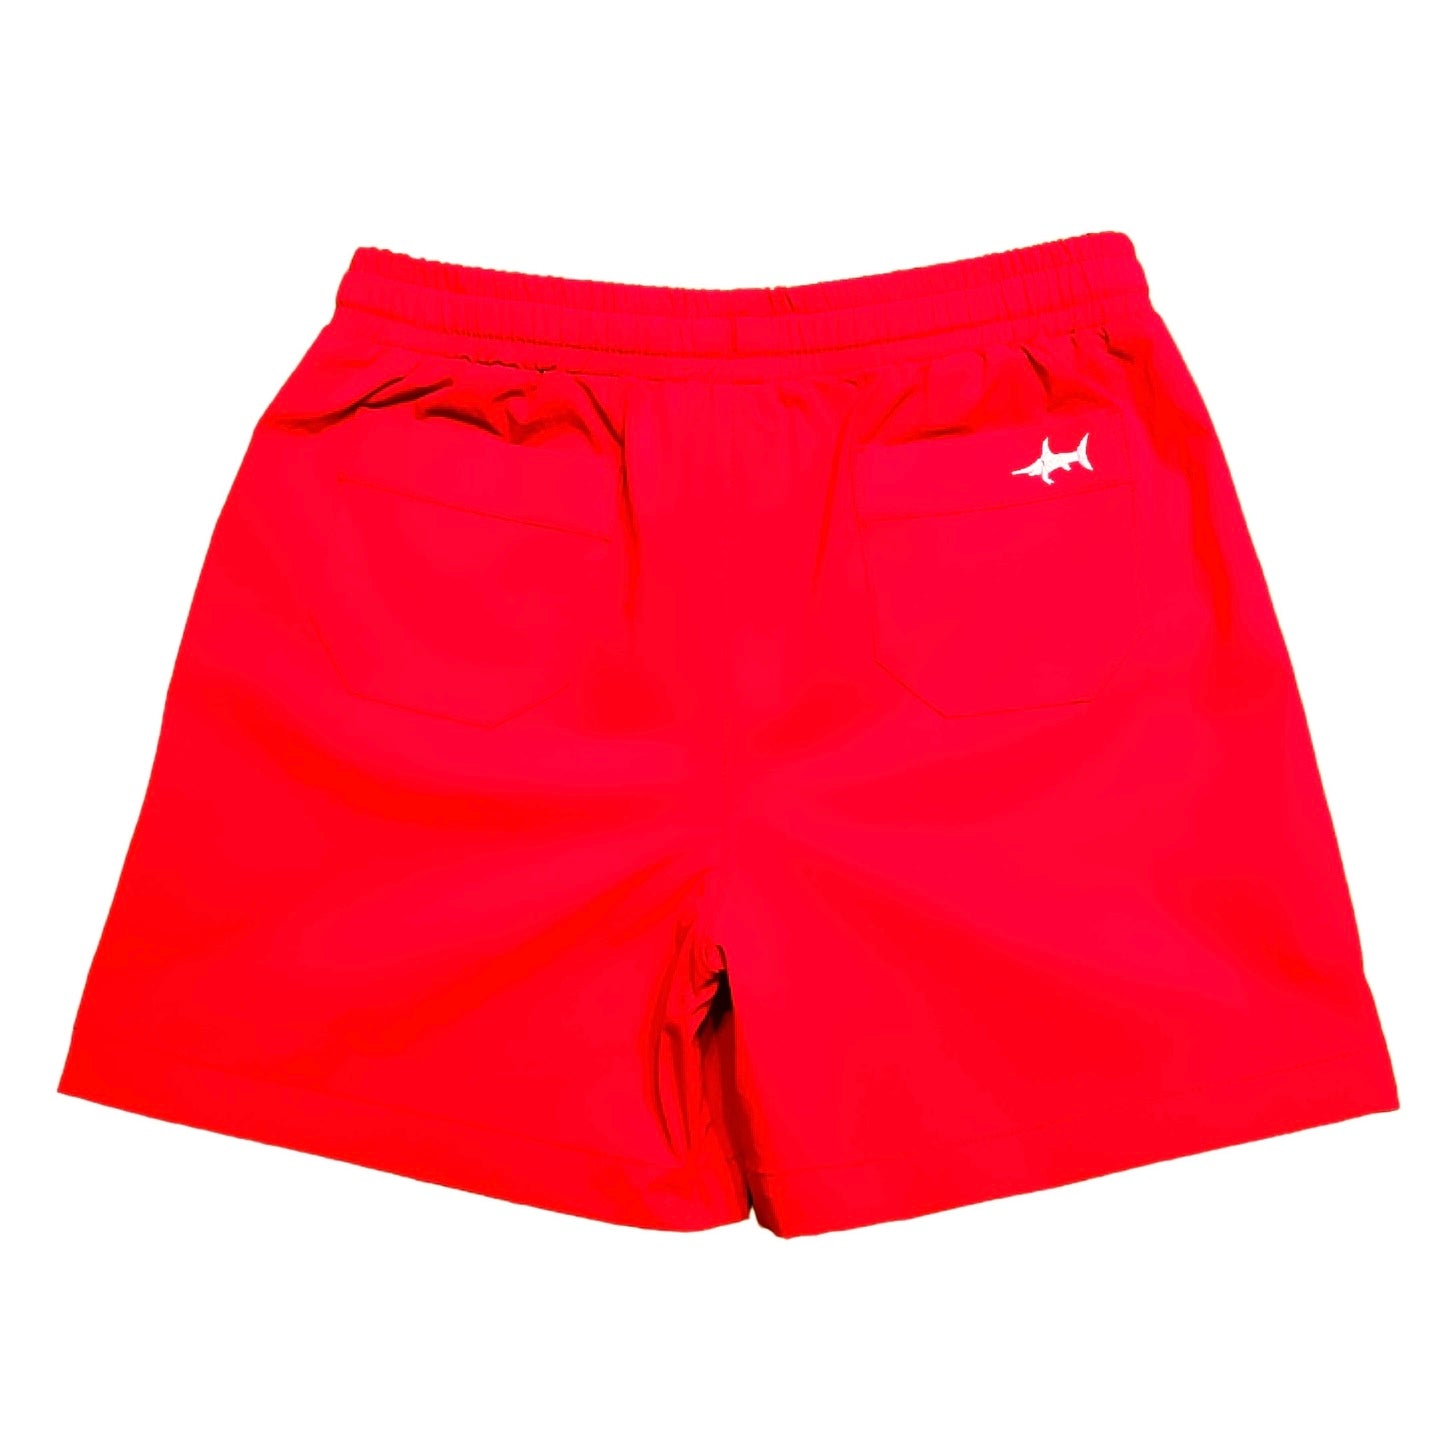 TOPSAIL PERFORMANCE SHORT RED